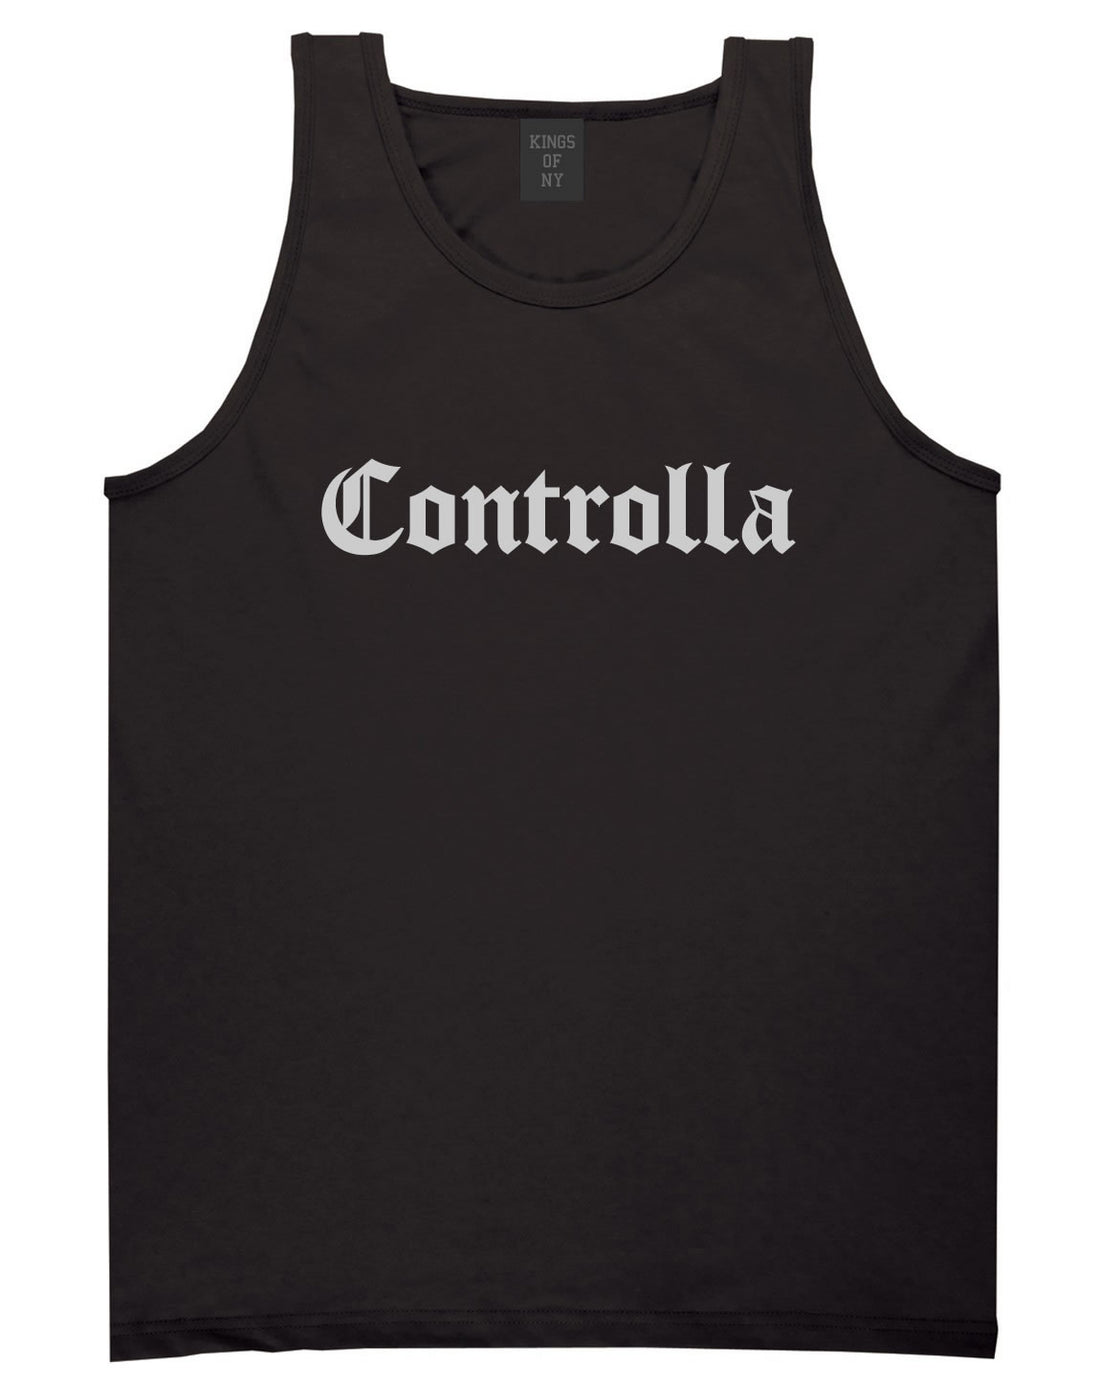 Controlla Tank Top By Kings Of NY